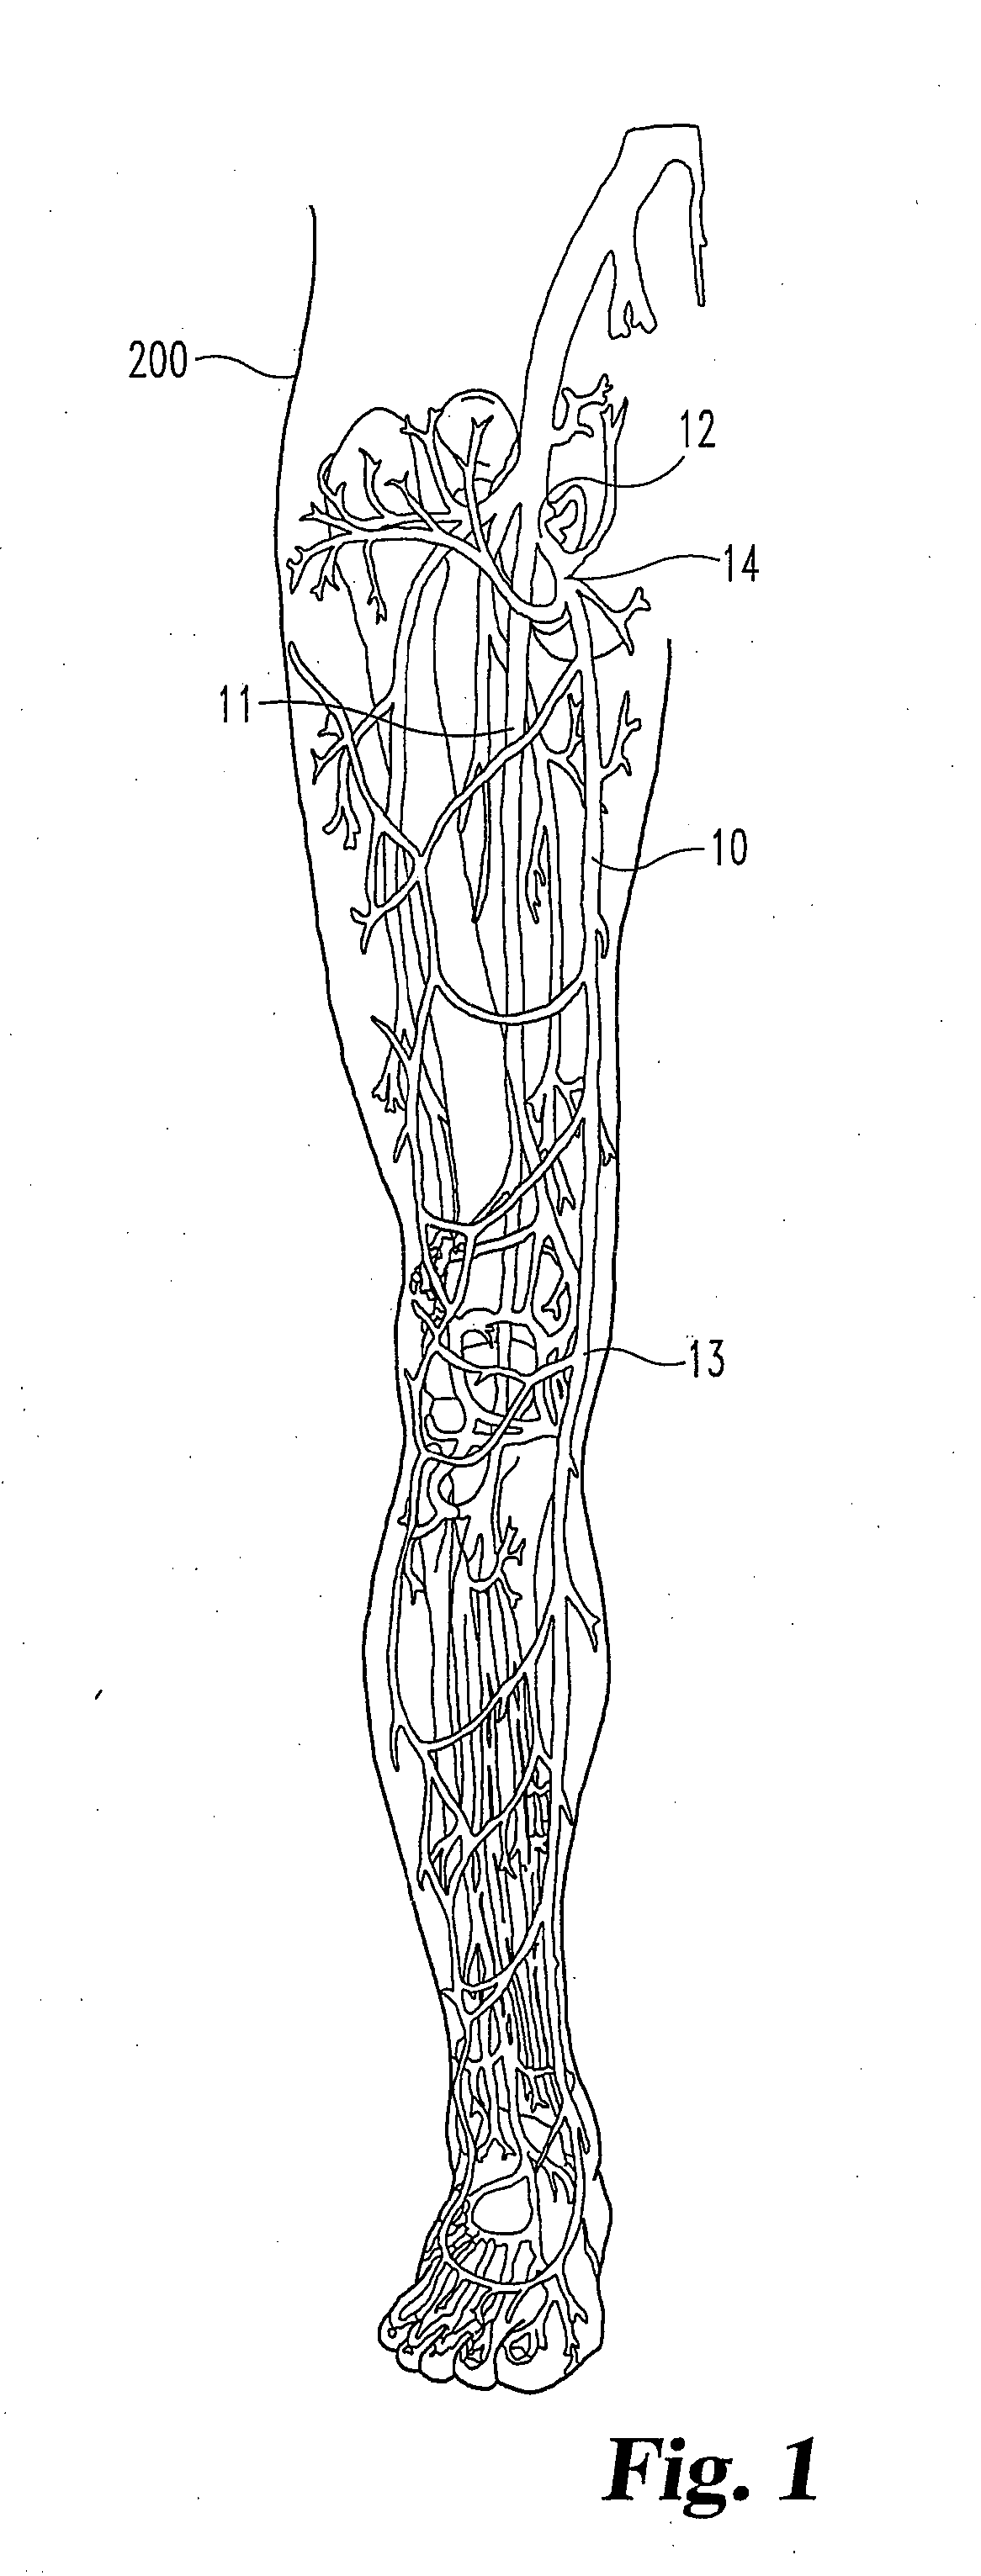 Methods, systems and devices for the delivery of endoluminal prostheses